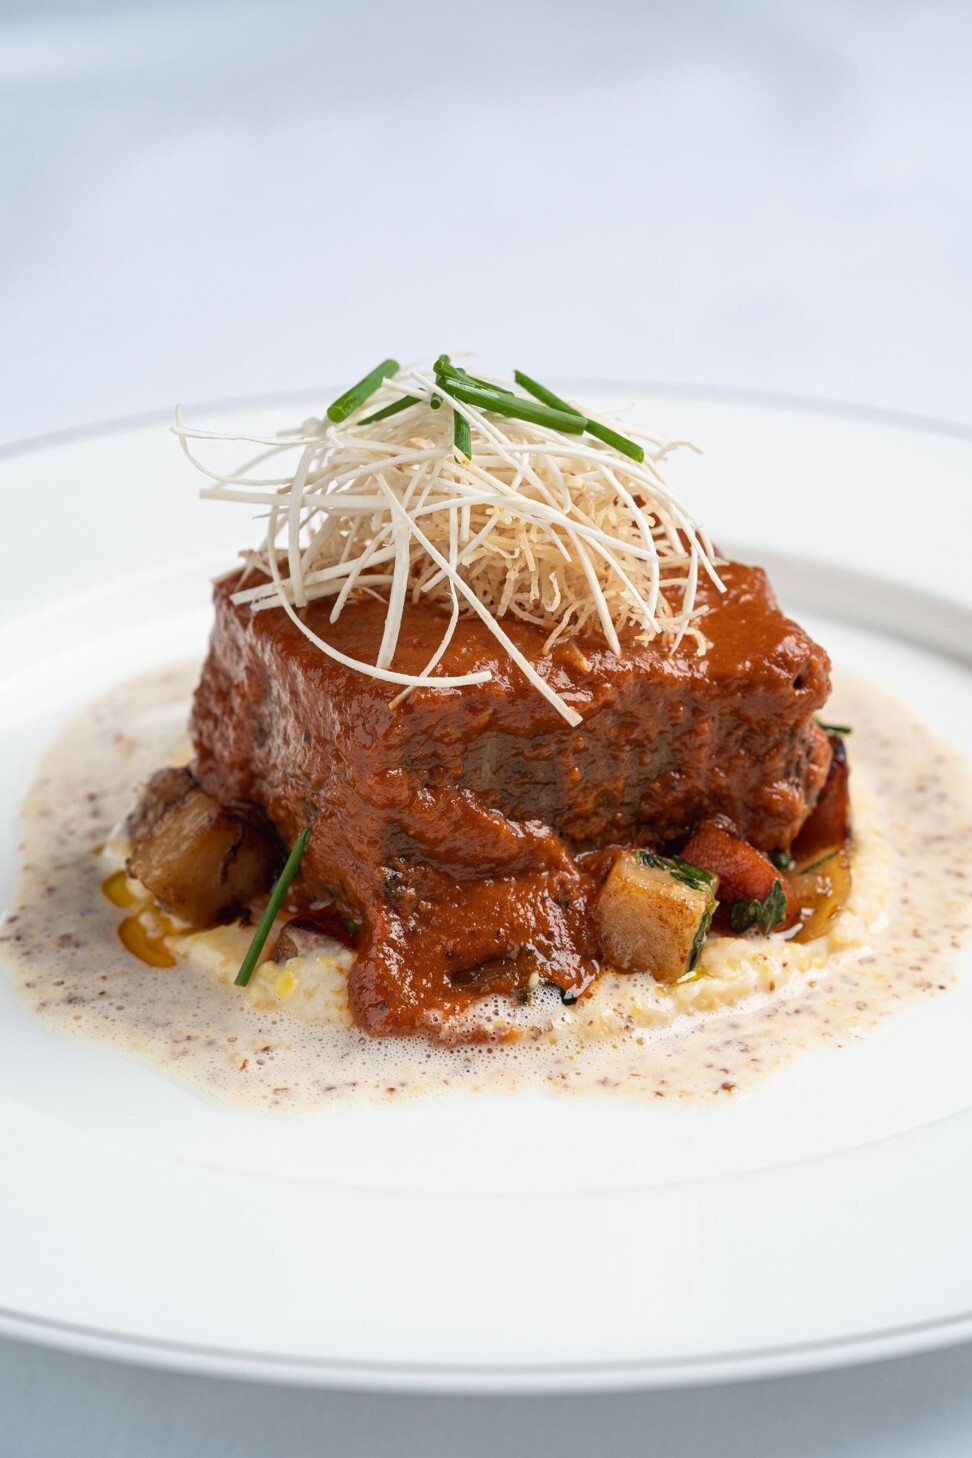 Cafe Gray Deluxe's Braised short rib of beef. Photo: Courtesy of The Upper House